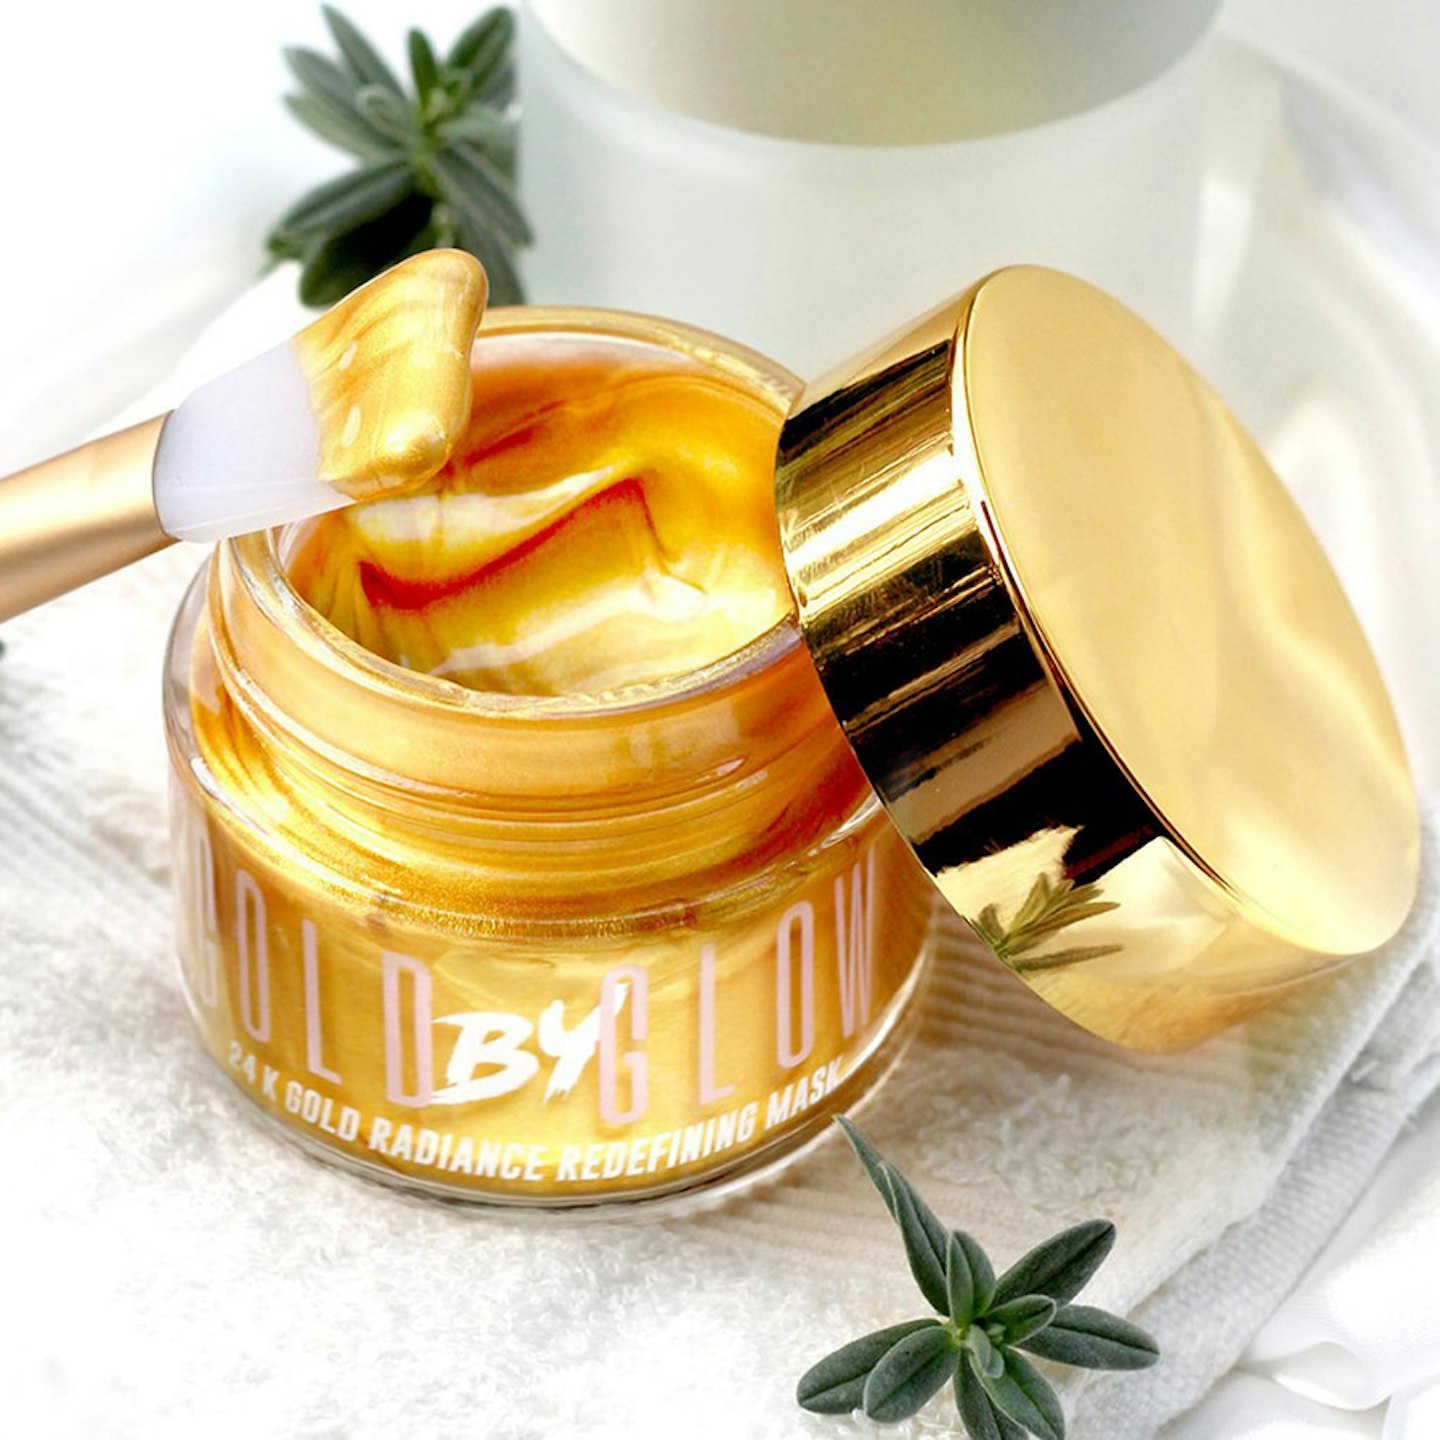 GOLD BY GLOW 24K Gold Radiance Redefining Mask